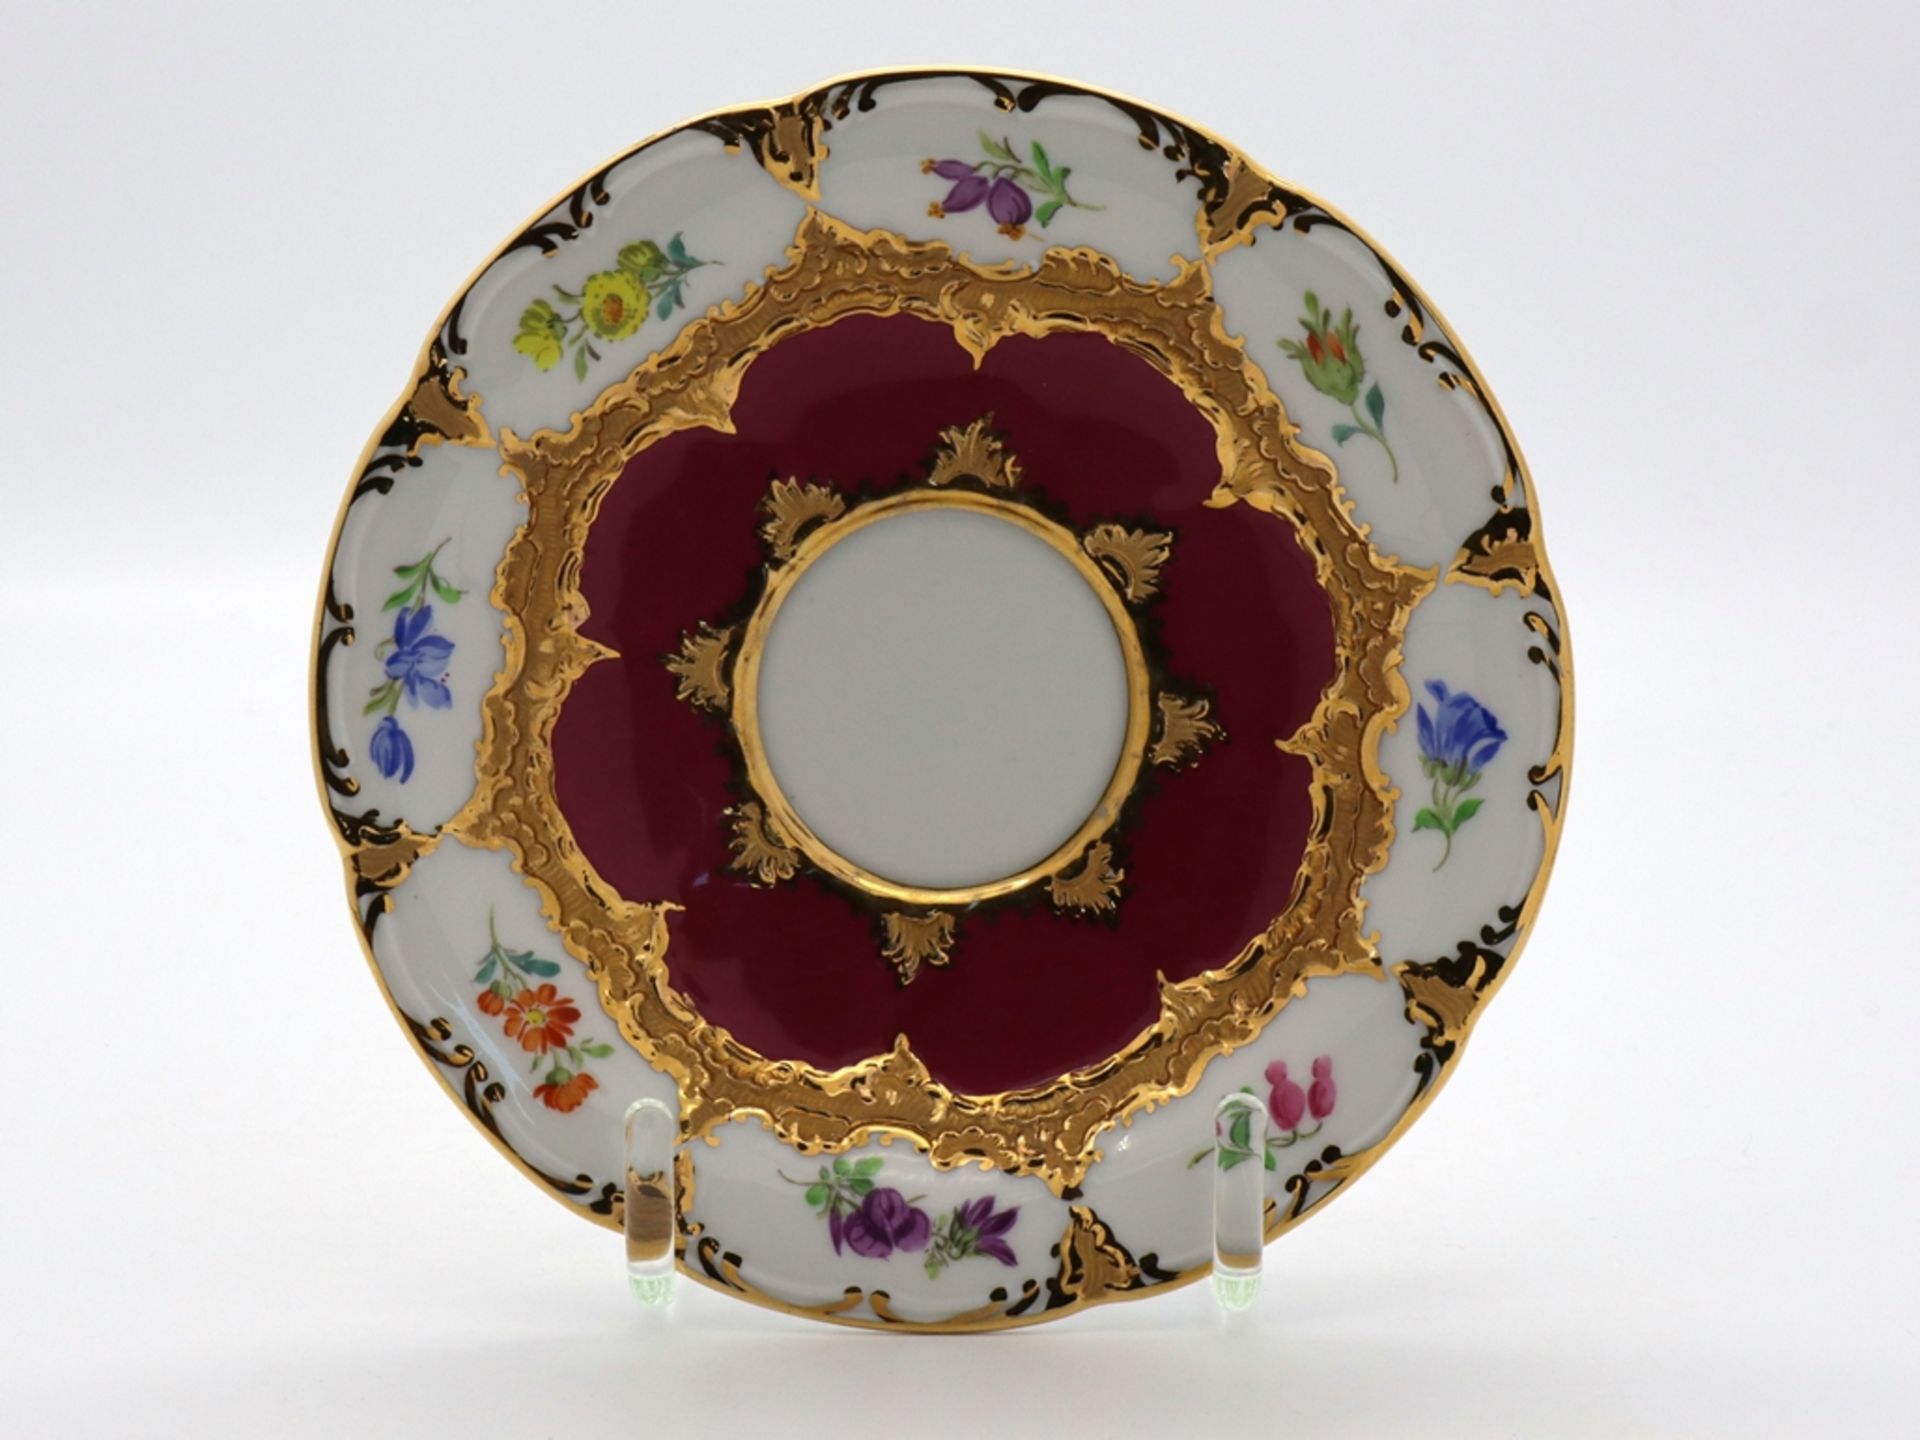 Meissen splendour mocha saucer, B-form 1st choice in noble purple with scattered flowers, after 194 - Image 4 of 4